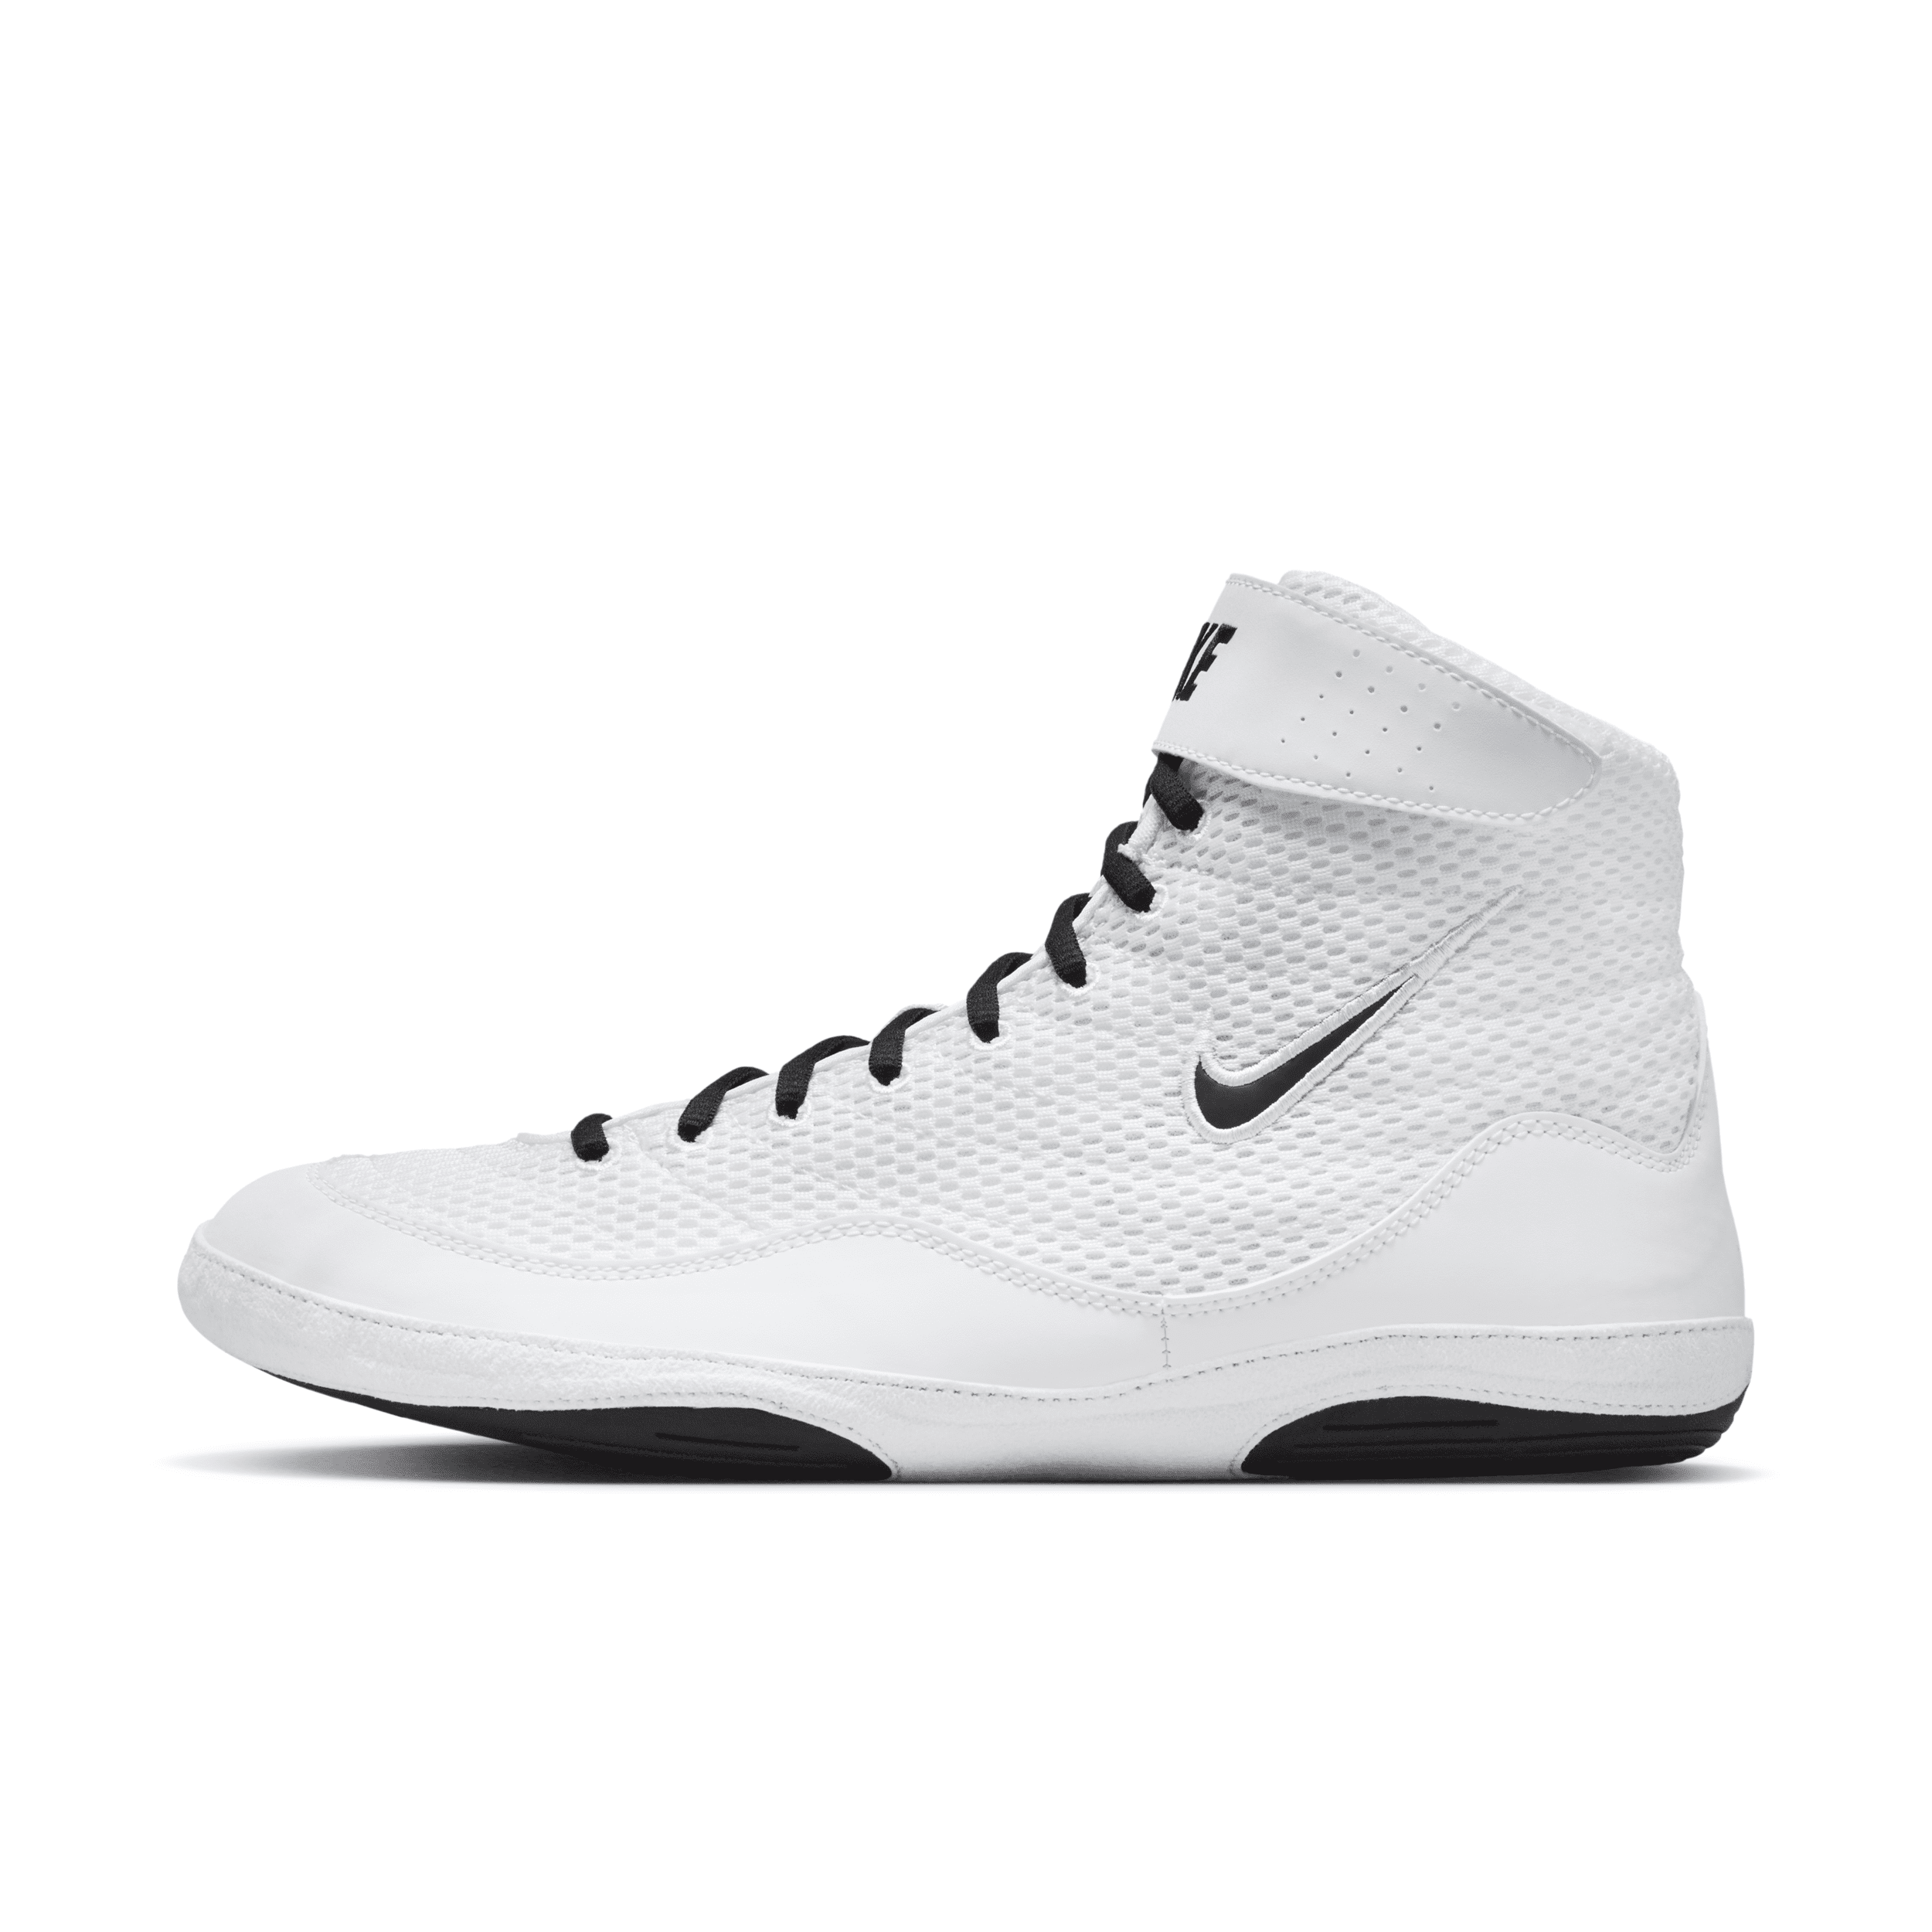 Nike Unisex Inflict Wrestling Shoes In White